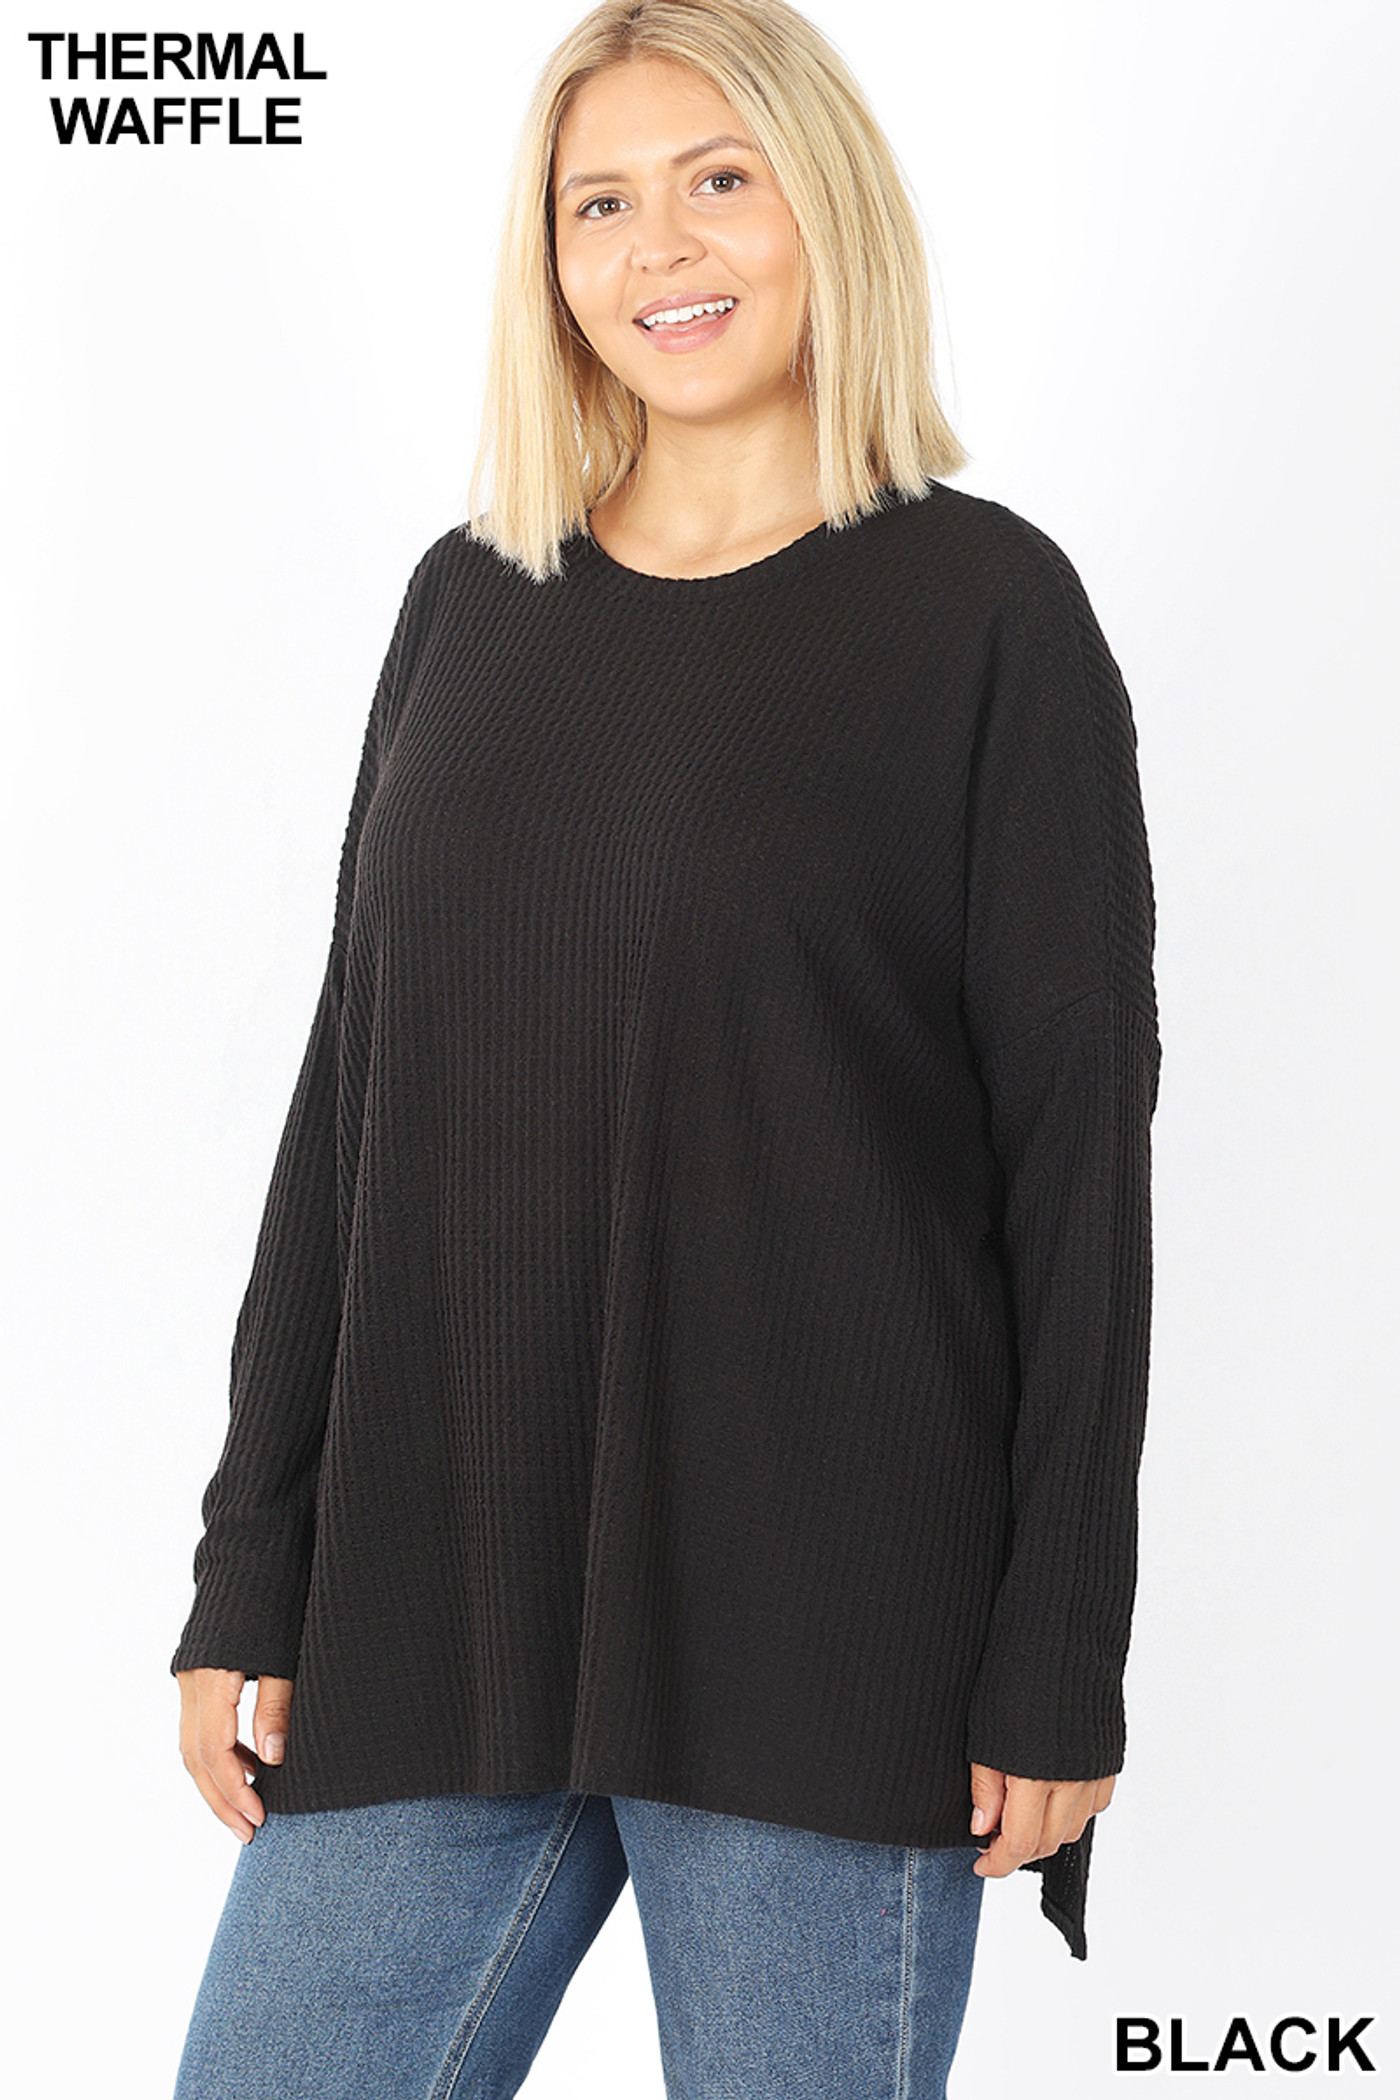 Brushed Thermal Waffle Knit Round Neck Hi-Low Plus Size Sweater